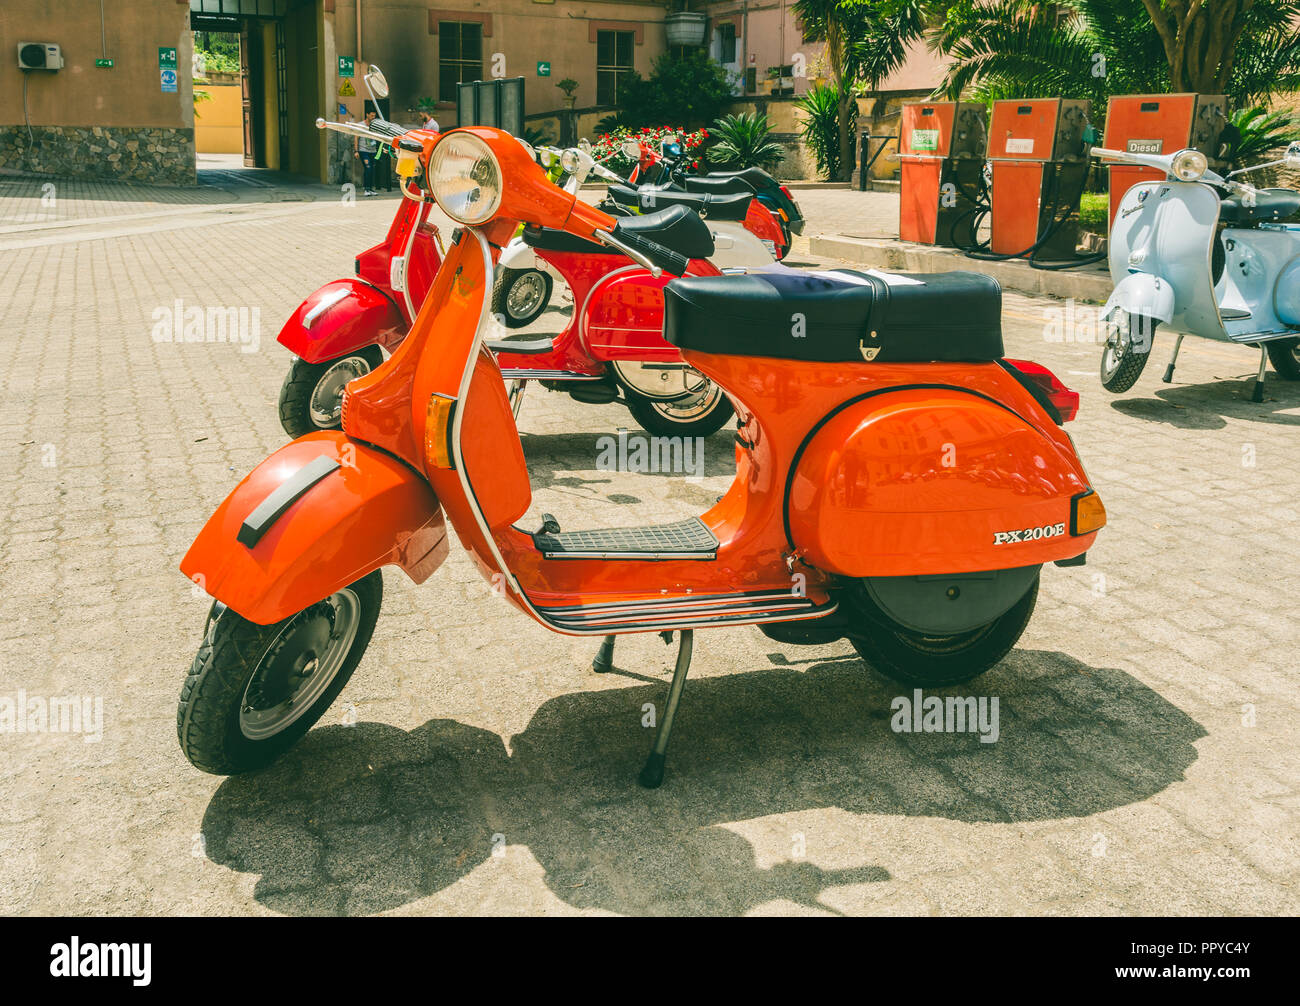 Cagliari, Italy - April 29, 2018: Piaggio Vespa vintage scooters meeting. Vintage red Vespa from the 50s. Post process in vintage styl Stock Photo